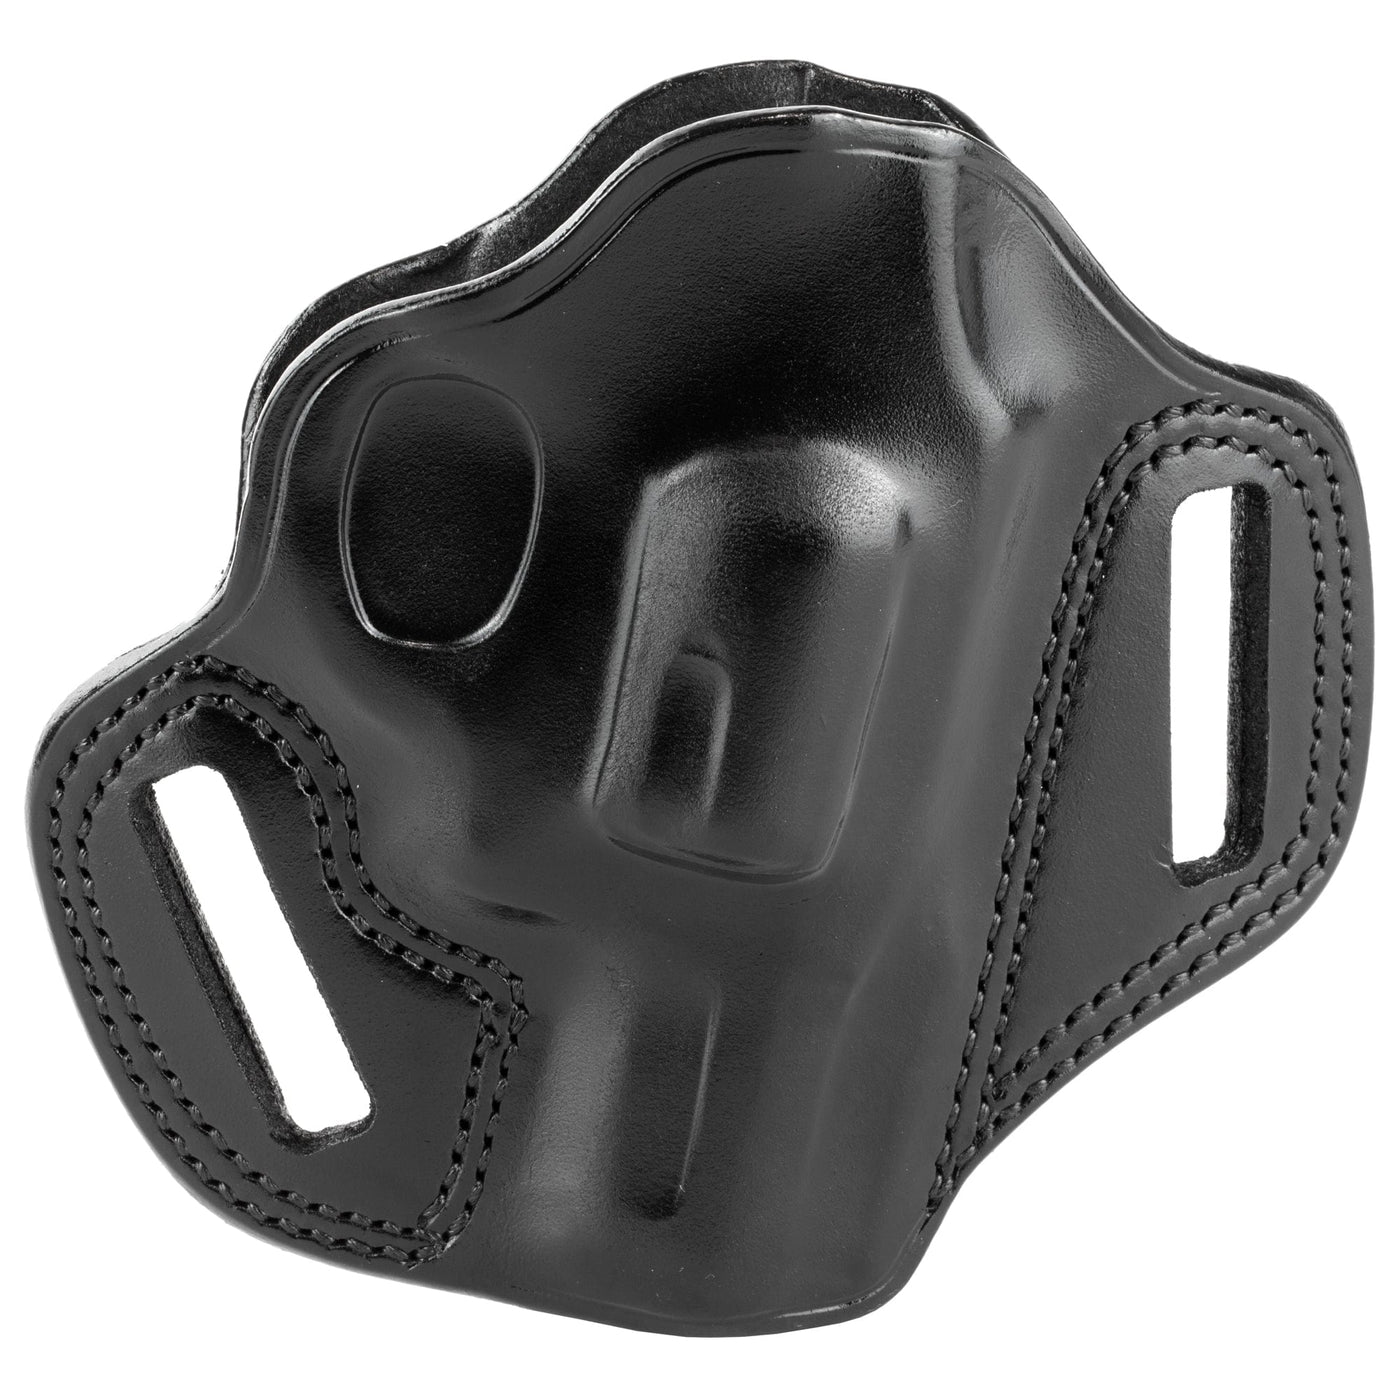 Galco Galco Combat Master J Fr Rh Blk Holsters